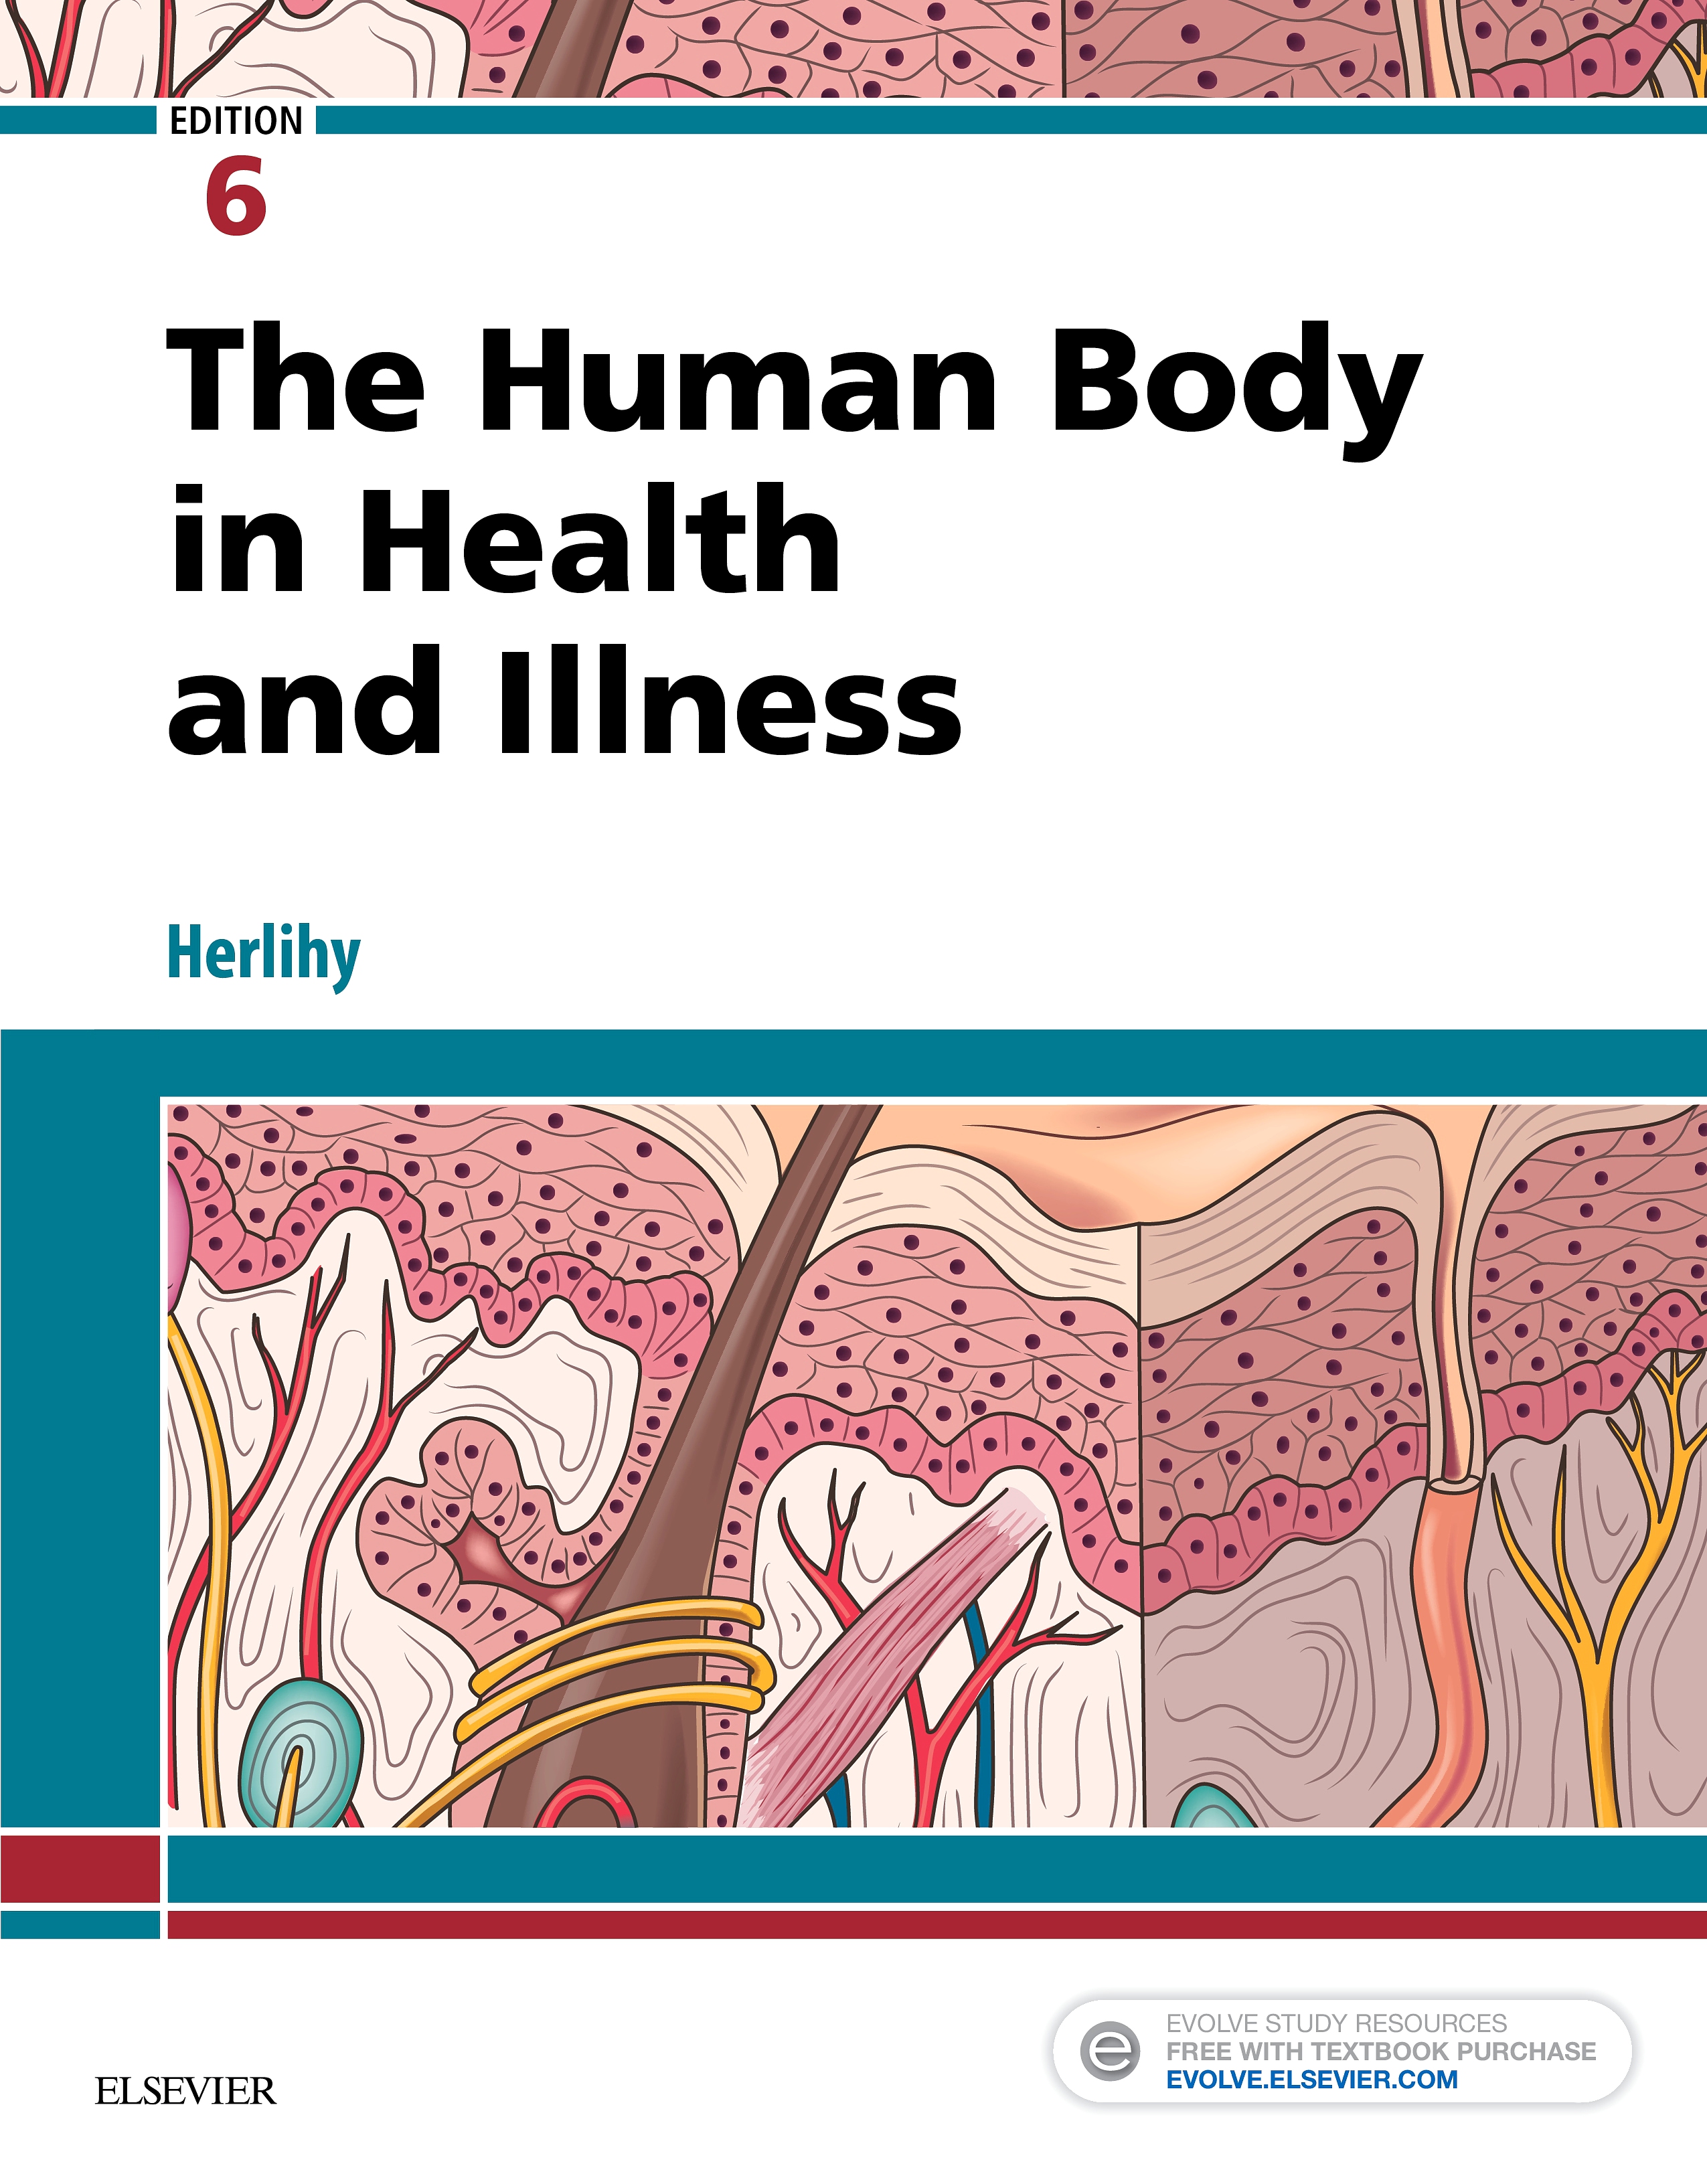 Evolve Resources for The Human Body in Health and Illness, 6th Edition